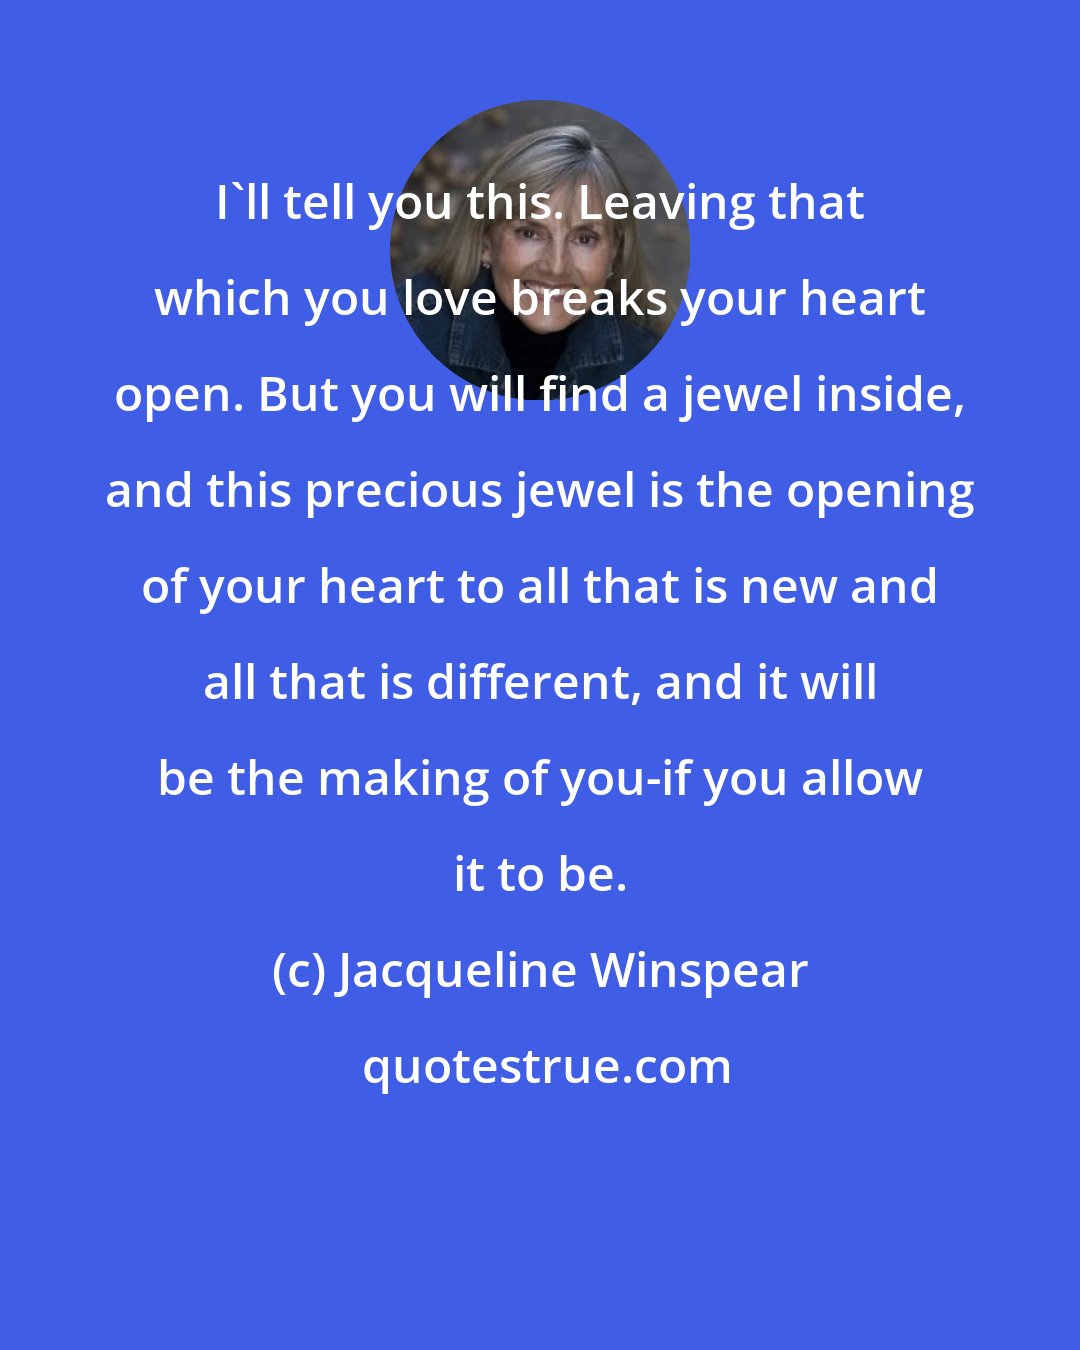 Jacqueline Winspear: I'll tell you this. Leaving that which you love breaks your heart open. But you will find a jewel inside, and this precious jewel is the opening of your heart to all that is new and all that is different, and it will be the making of you-if you allow it to be.